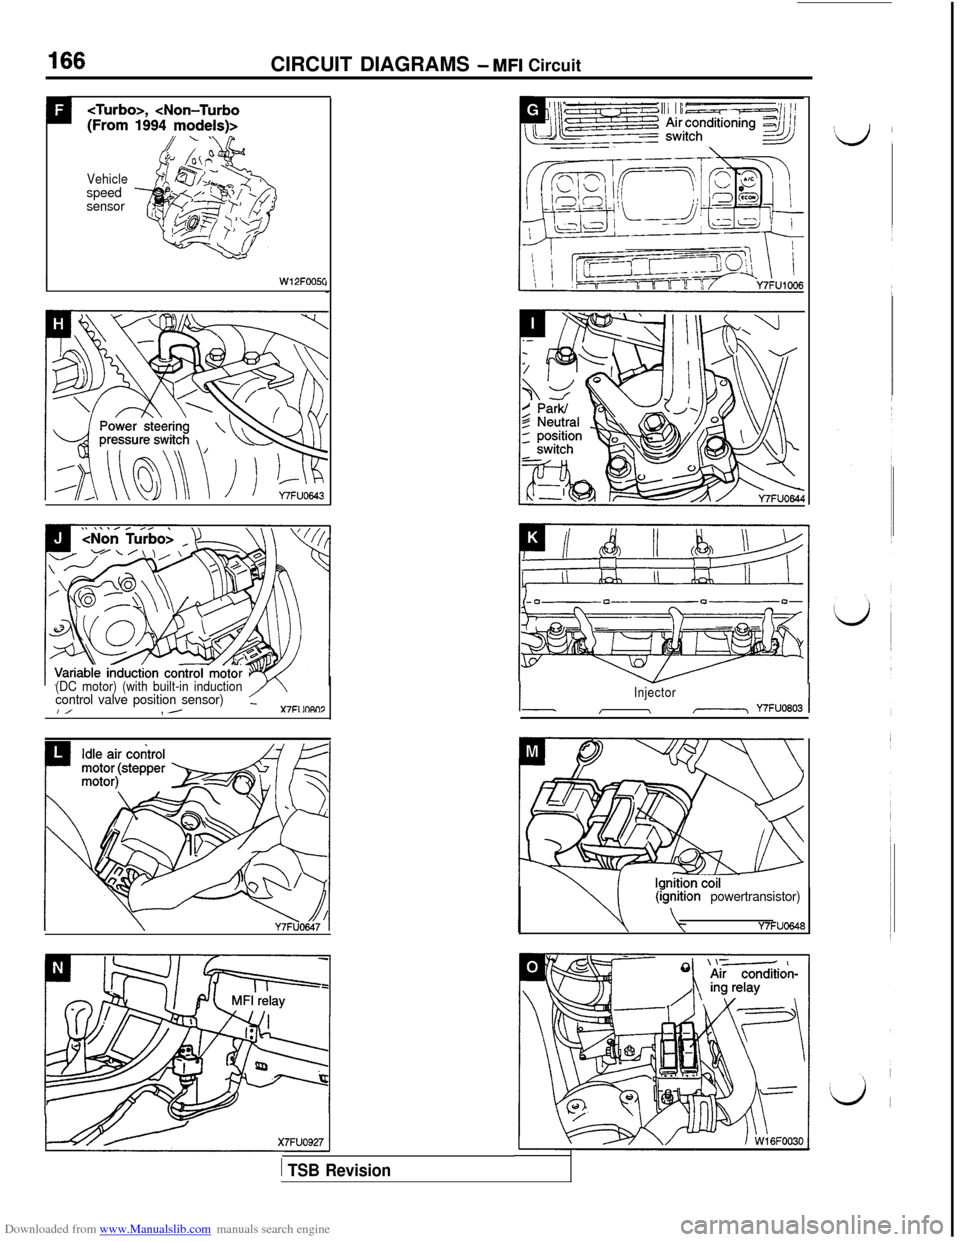 MITSUBISHI 3000GT 1993 2.G Workshop Manual Downloaded from www.Manualslib.com manuals search engine CIRCUIT DIAGRAMS - MFI Circuit
<Turbo>, <Non-Turbo(From 1994 models)>
Vehiclespeed
sensor
IW12FOOSC
(DC motor) (with built-in inductioncontrol 